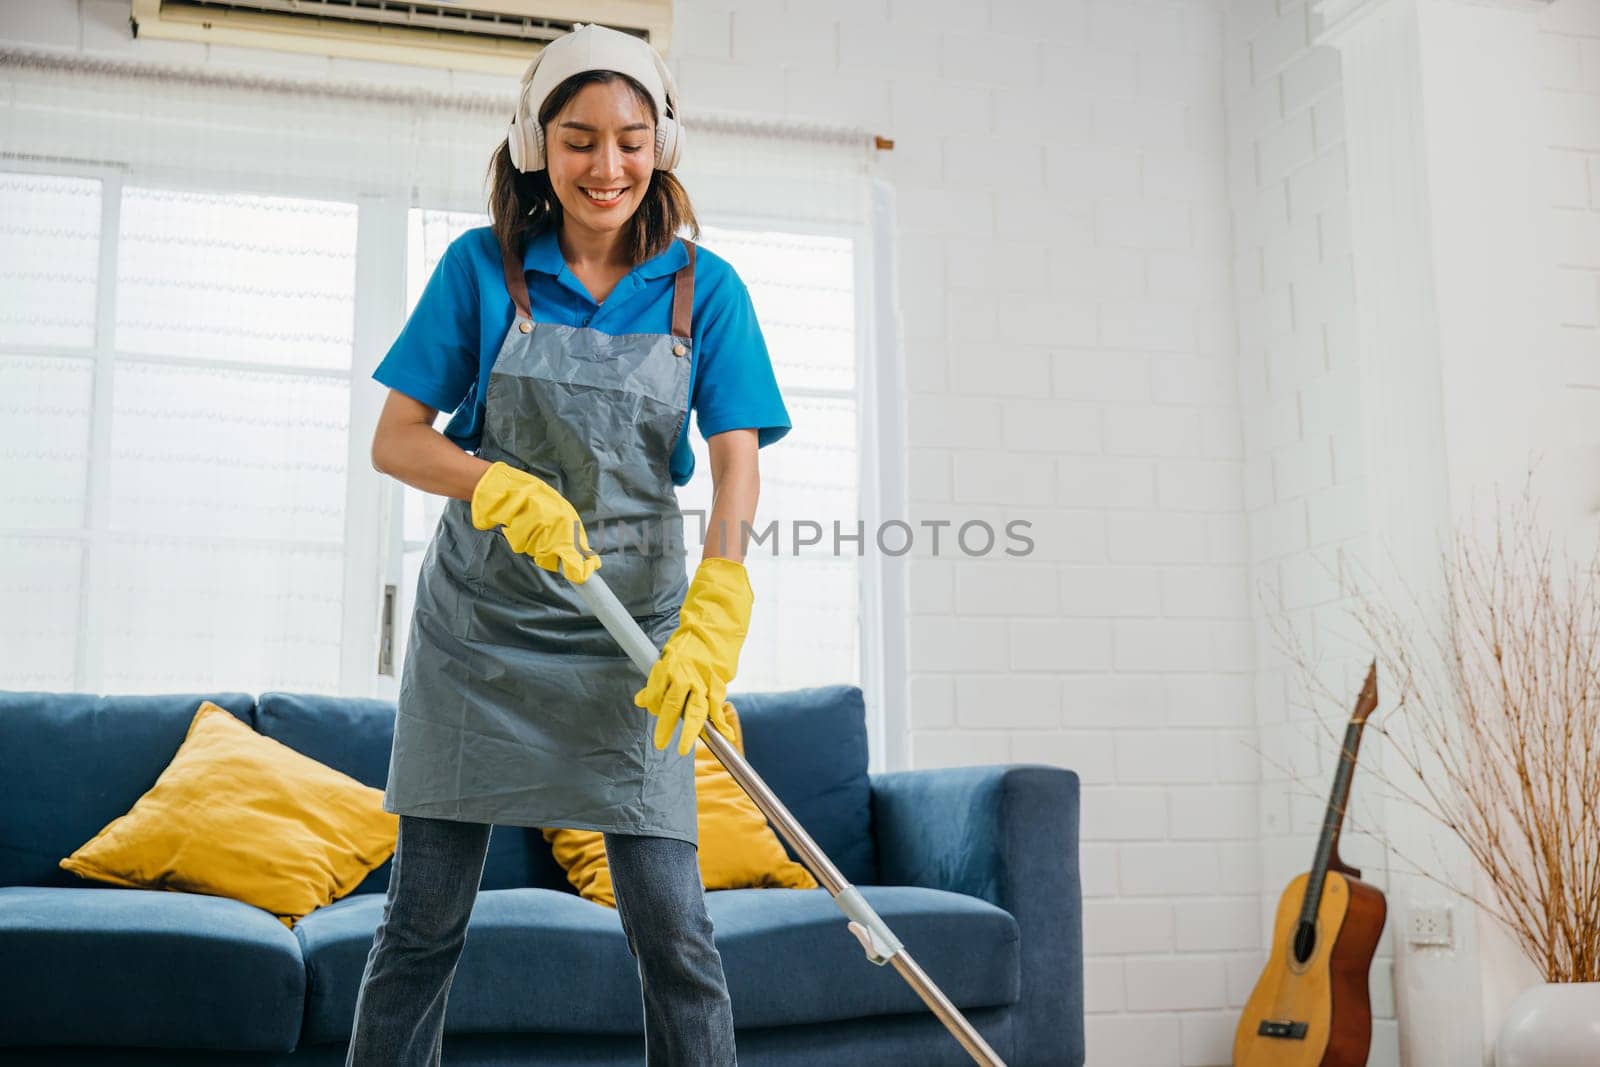 Asian teenager vibrant cleanup, maid sings dances in headphones. Joyful occupation blended with music excitement. Modern cleaning with tech appeal. Happy and Fun During Cleaning